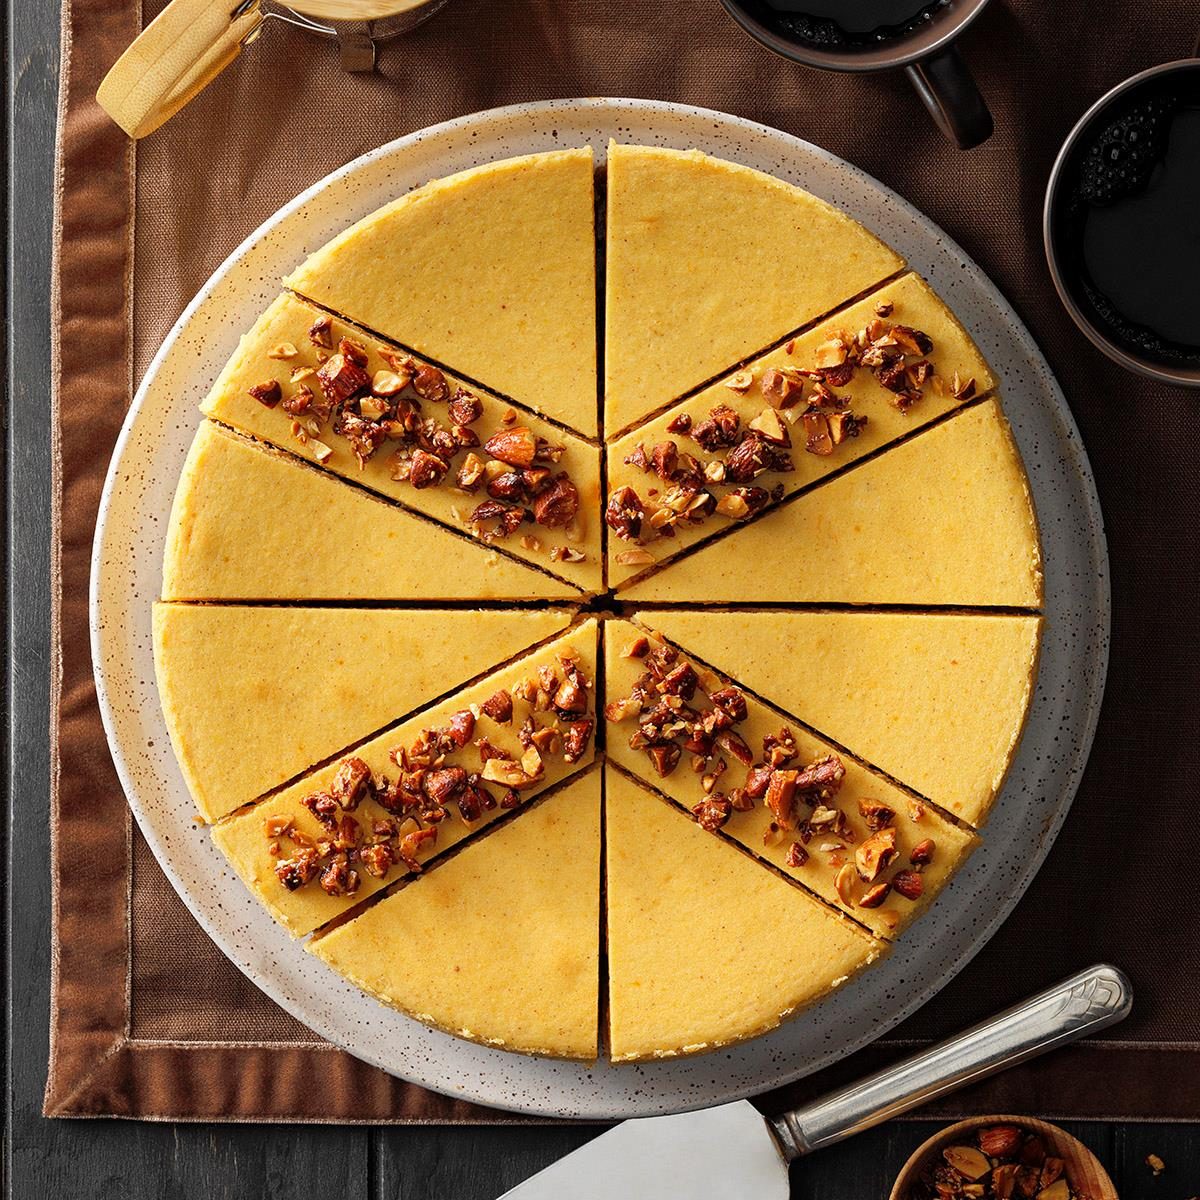 White Chocolate Pumpkin Cheesecake with Almond Topping